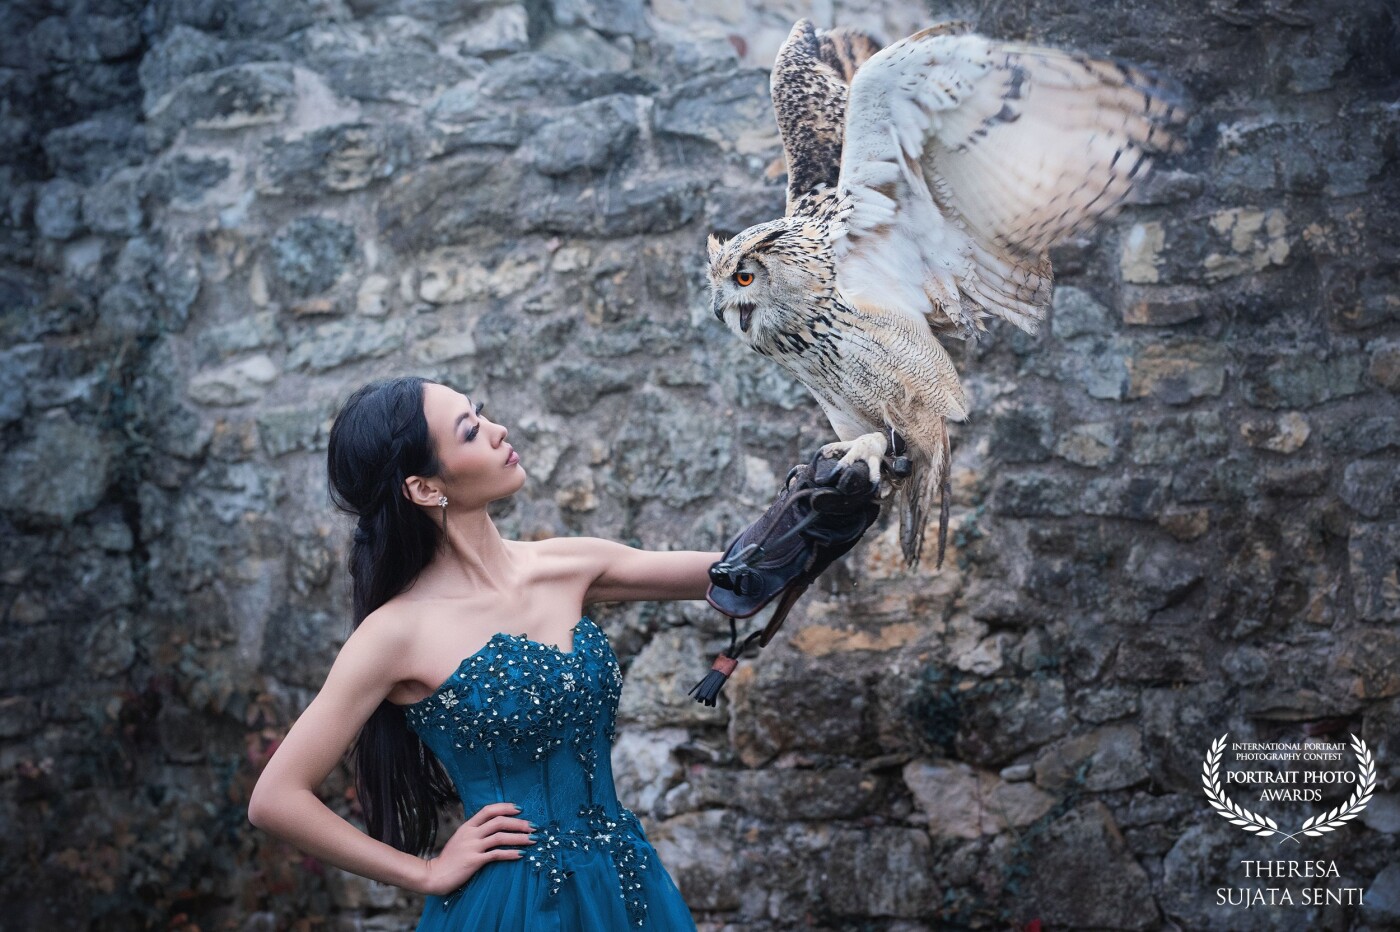 I love working with owls! They are such beautiful animals!!! And Hue did a perfect job handling the animal and posing and looking gorgeous, all at the same time. Also a huge thank you to @celine.makeupartist who did the beautiful makeup and styling!